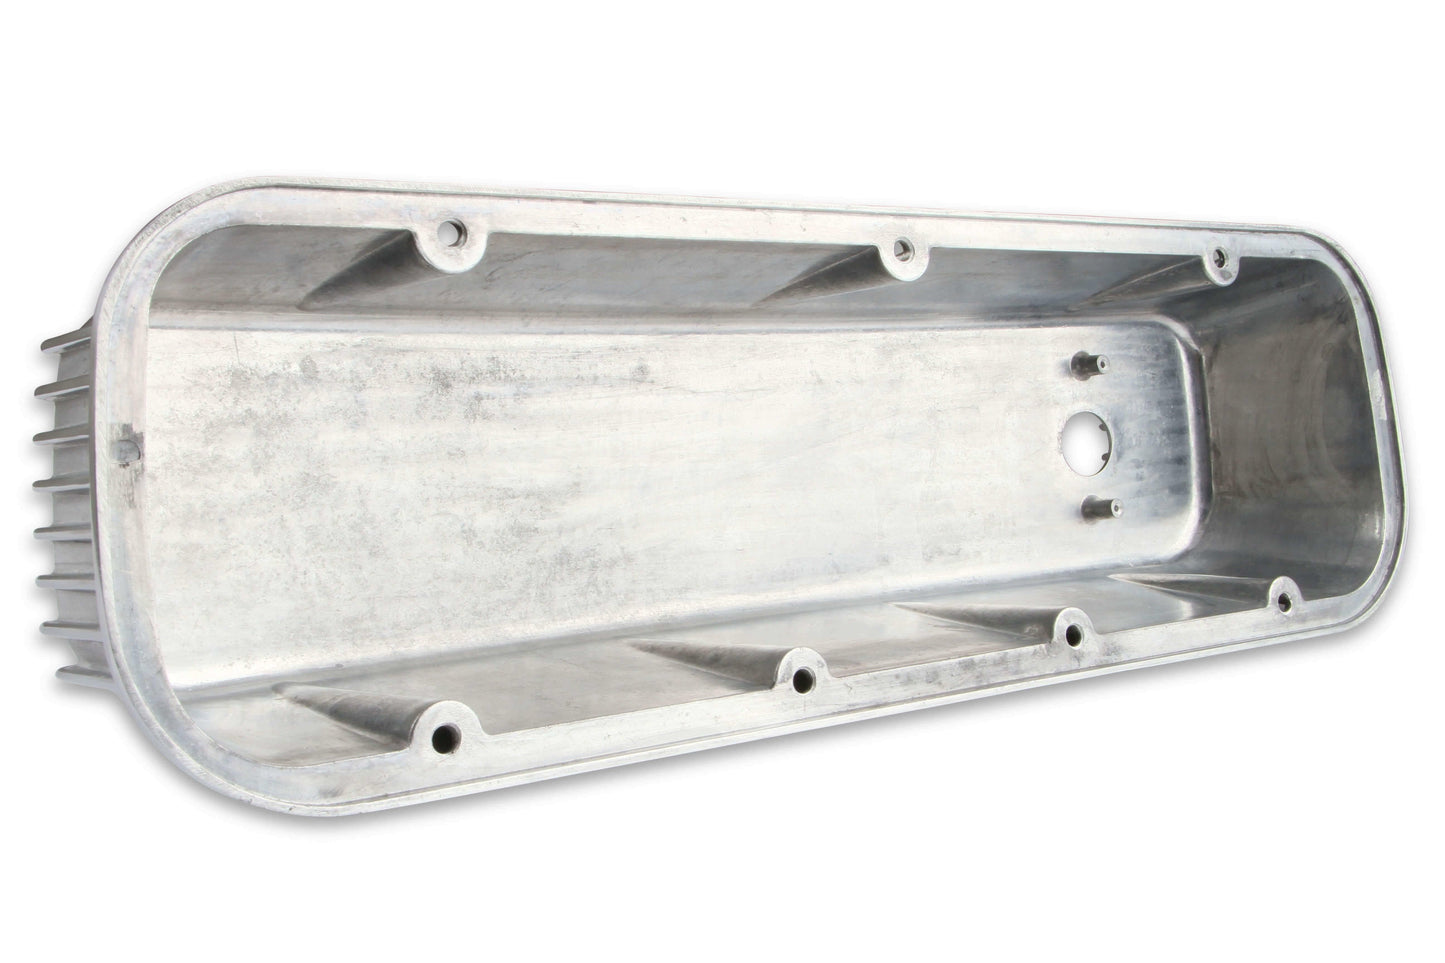 Mr. Gasket Cast Aluminum Tall Valve Covers - Polished - 6859G